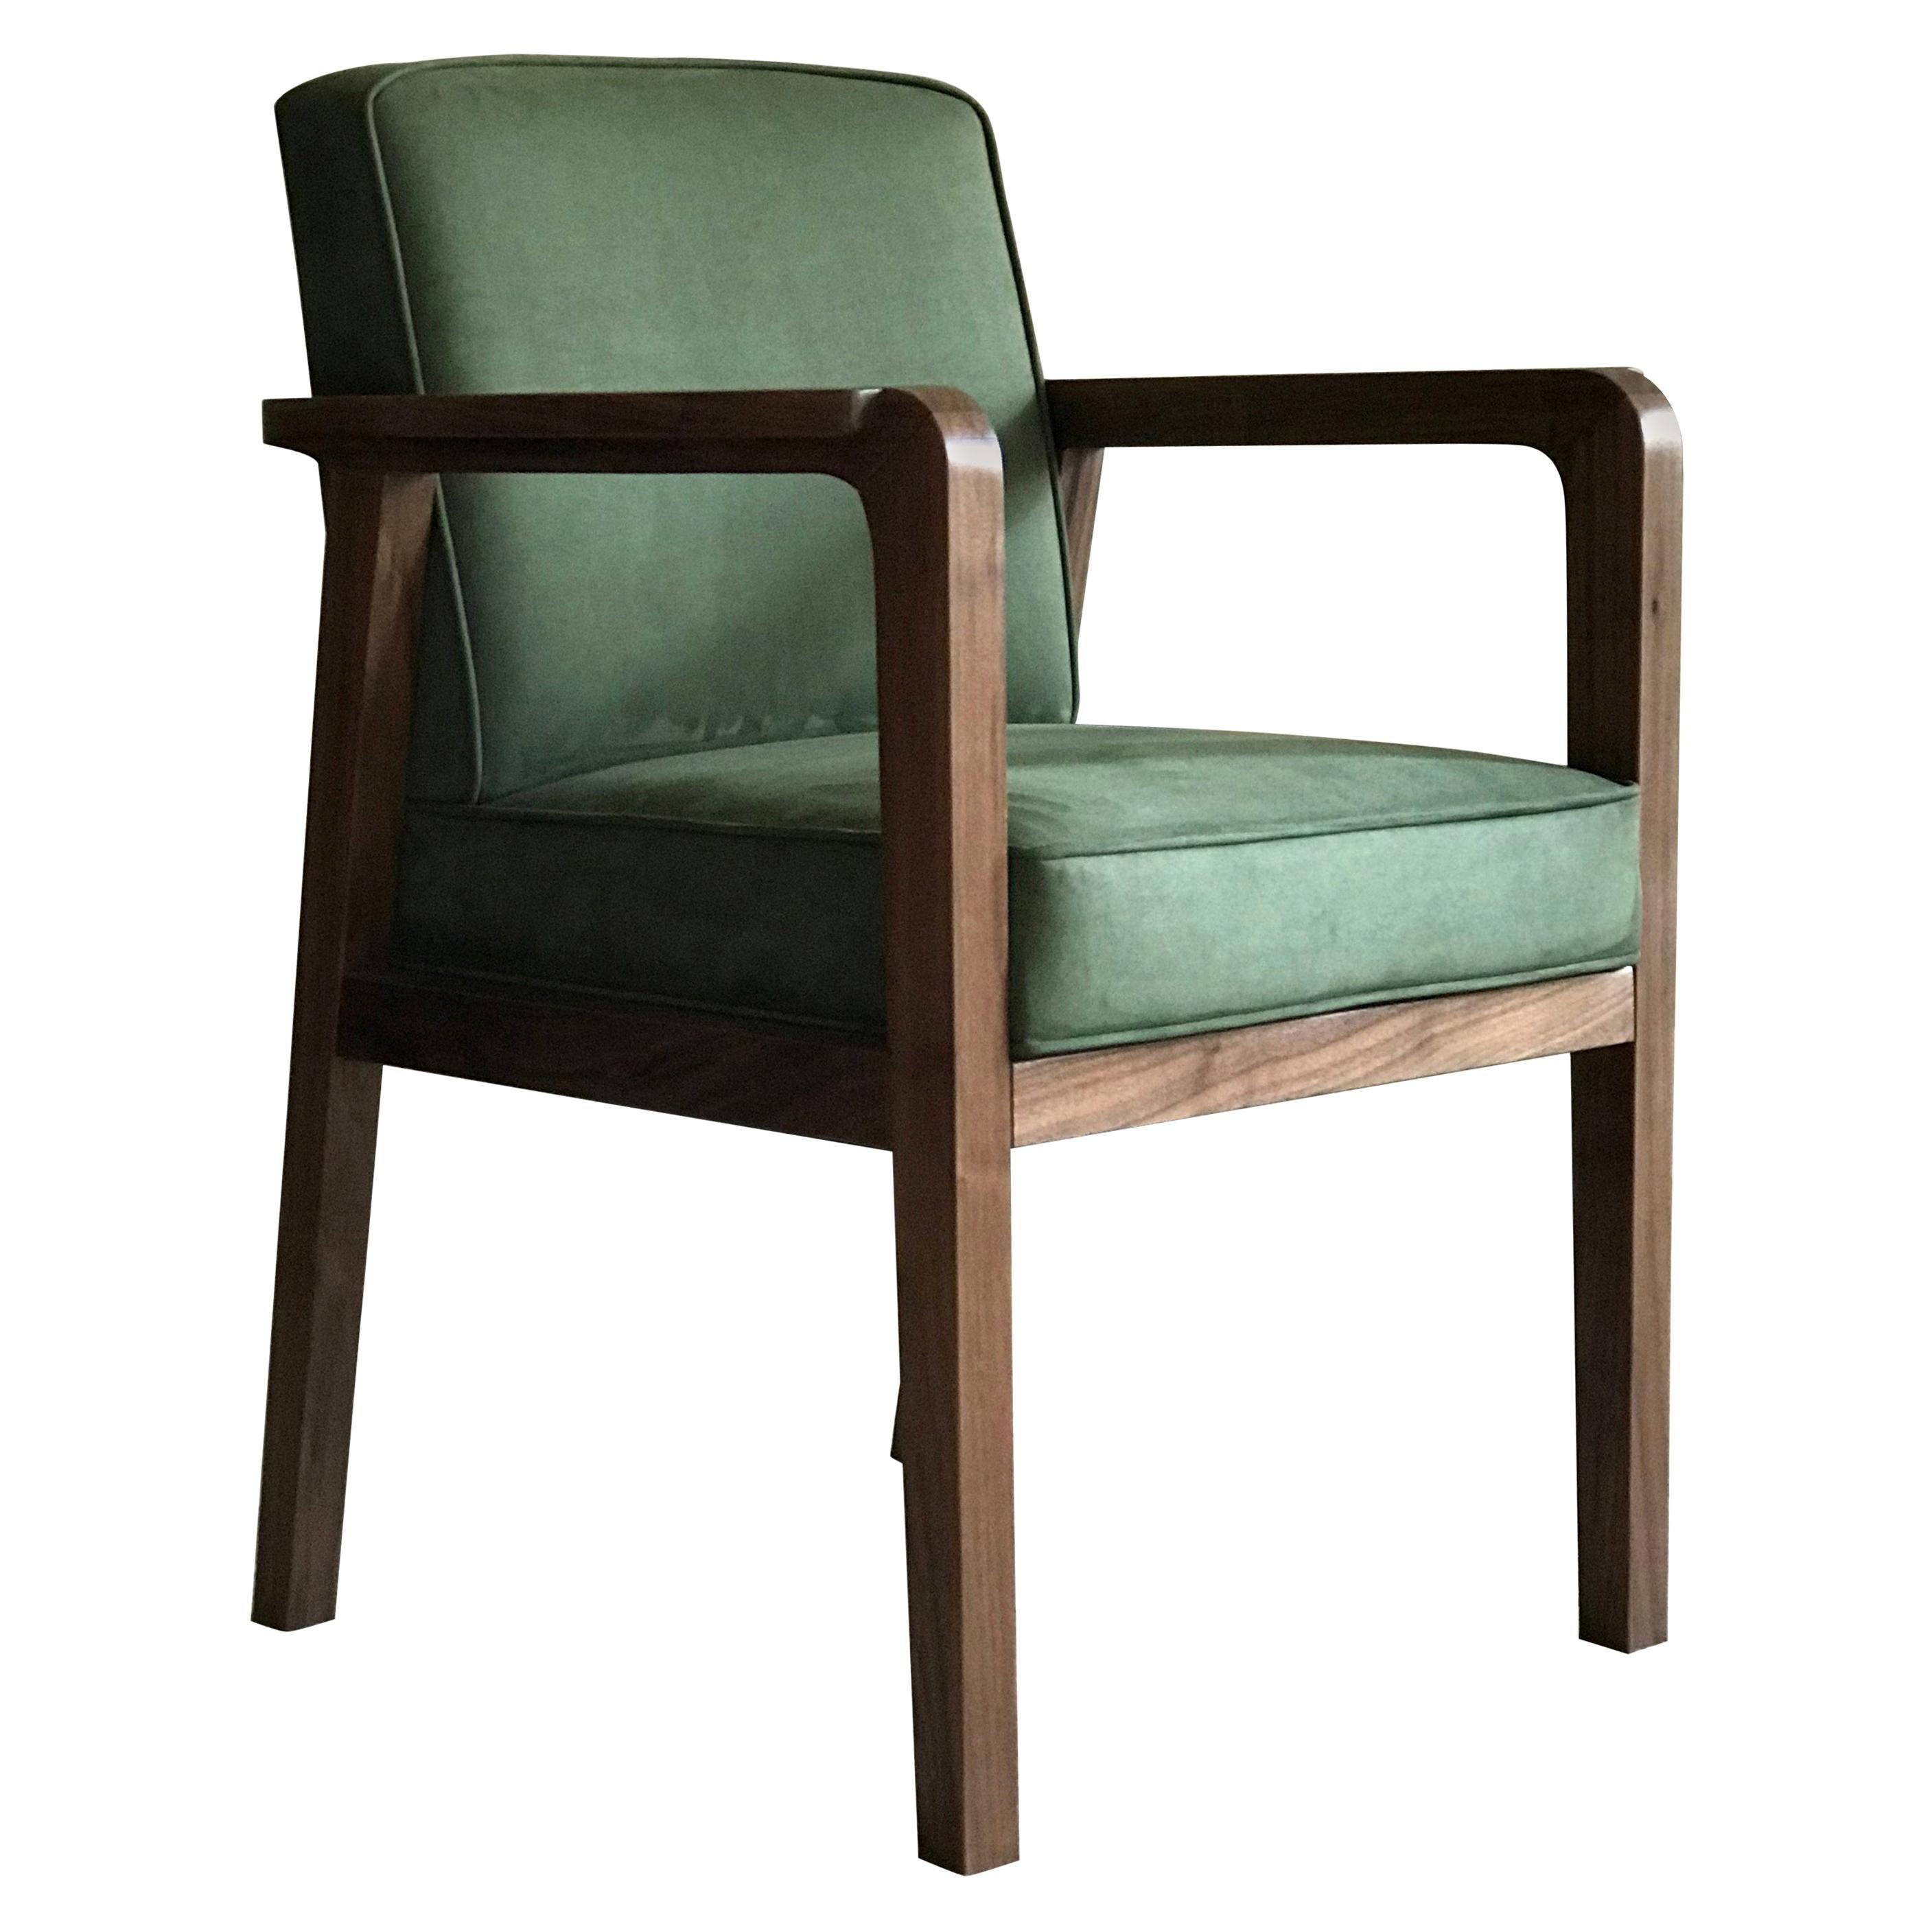 What are dining chairs without arms called?